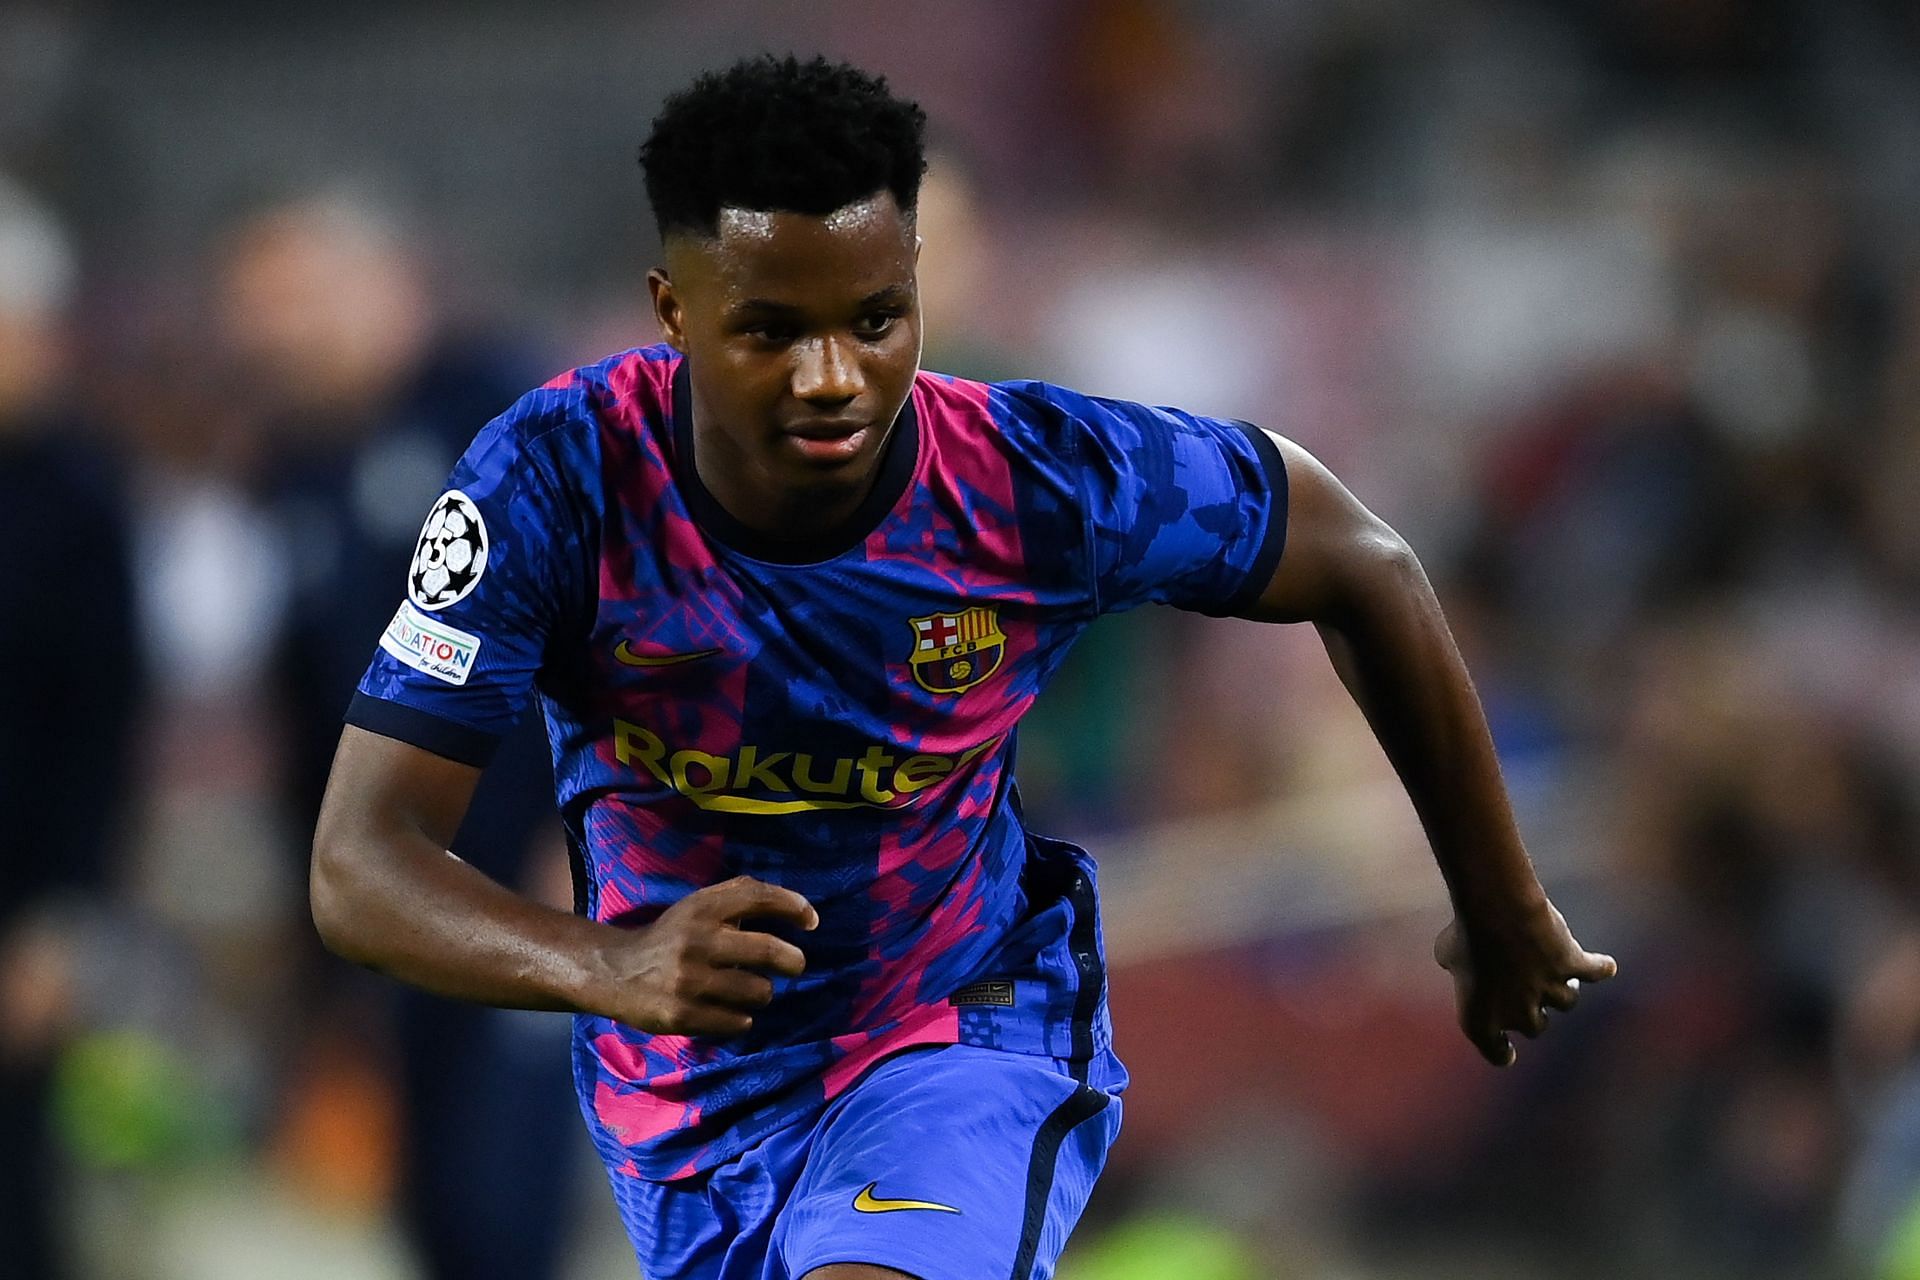 Youngster Ansu Fati scored the match-winner for Barcelona against Dynamo Kyiv